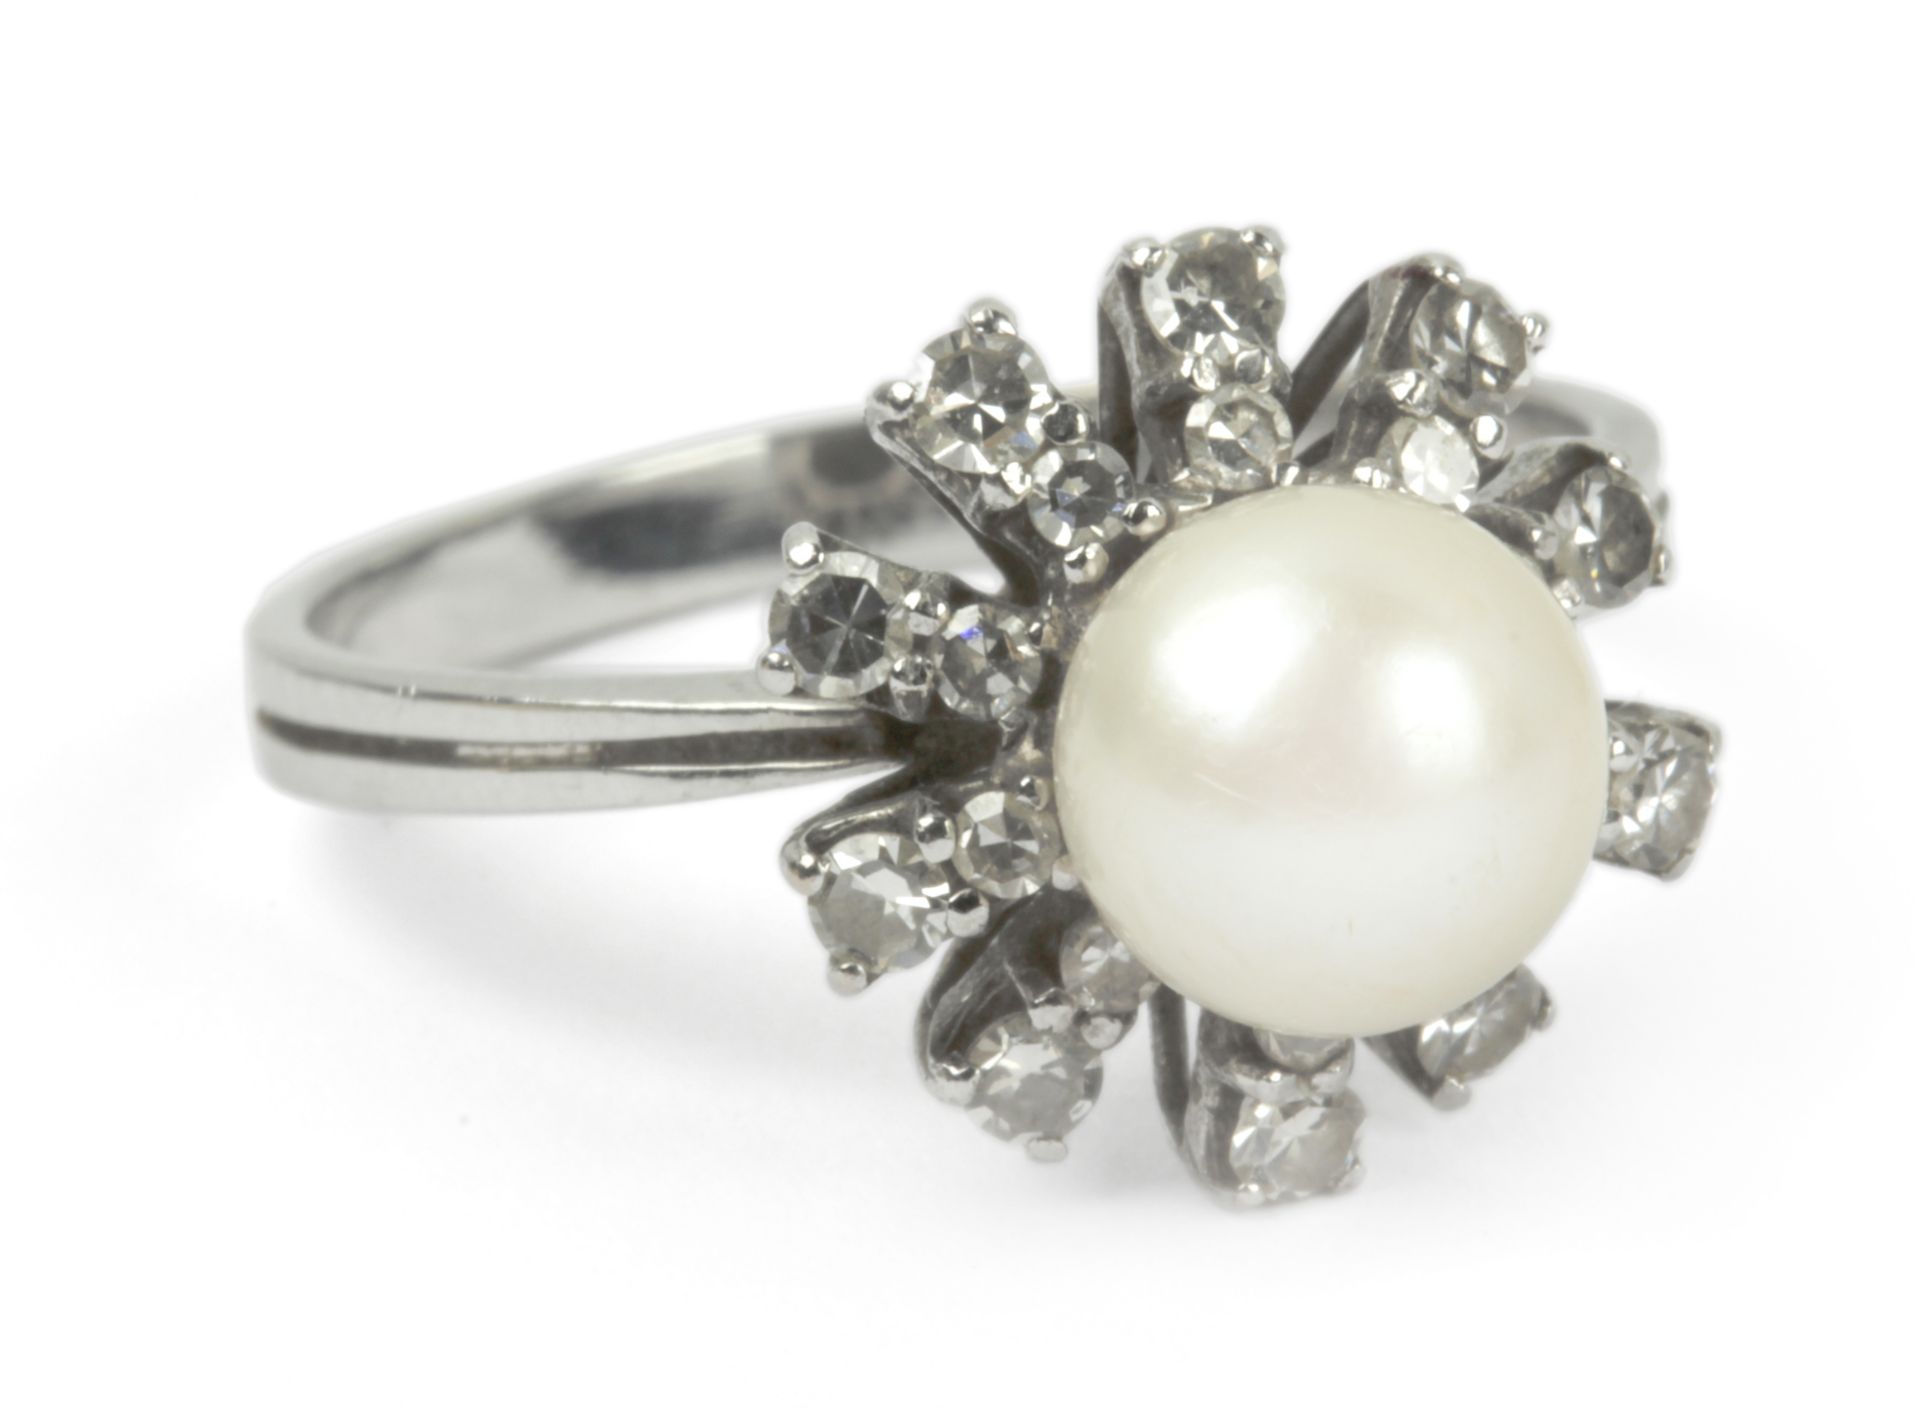 Pearl and diamonds cluster ring with an 18k yellow gold setting